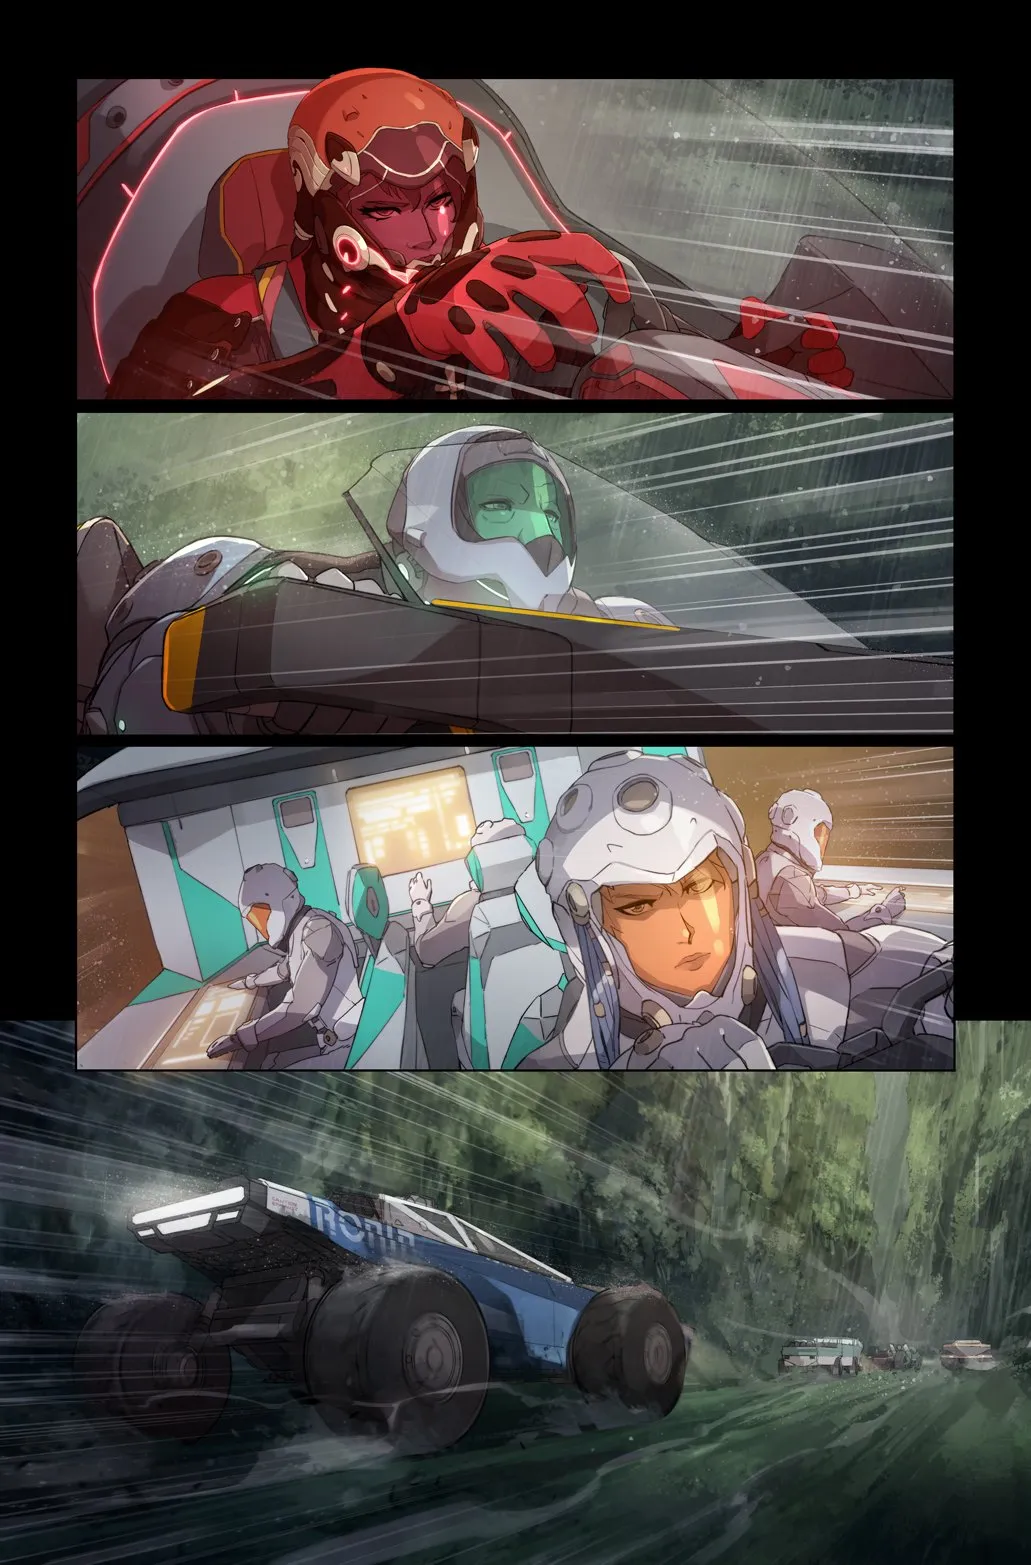 Illustration of four vehicles racing in sci-fi attire.